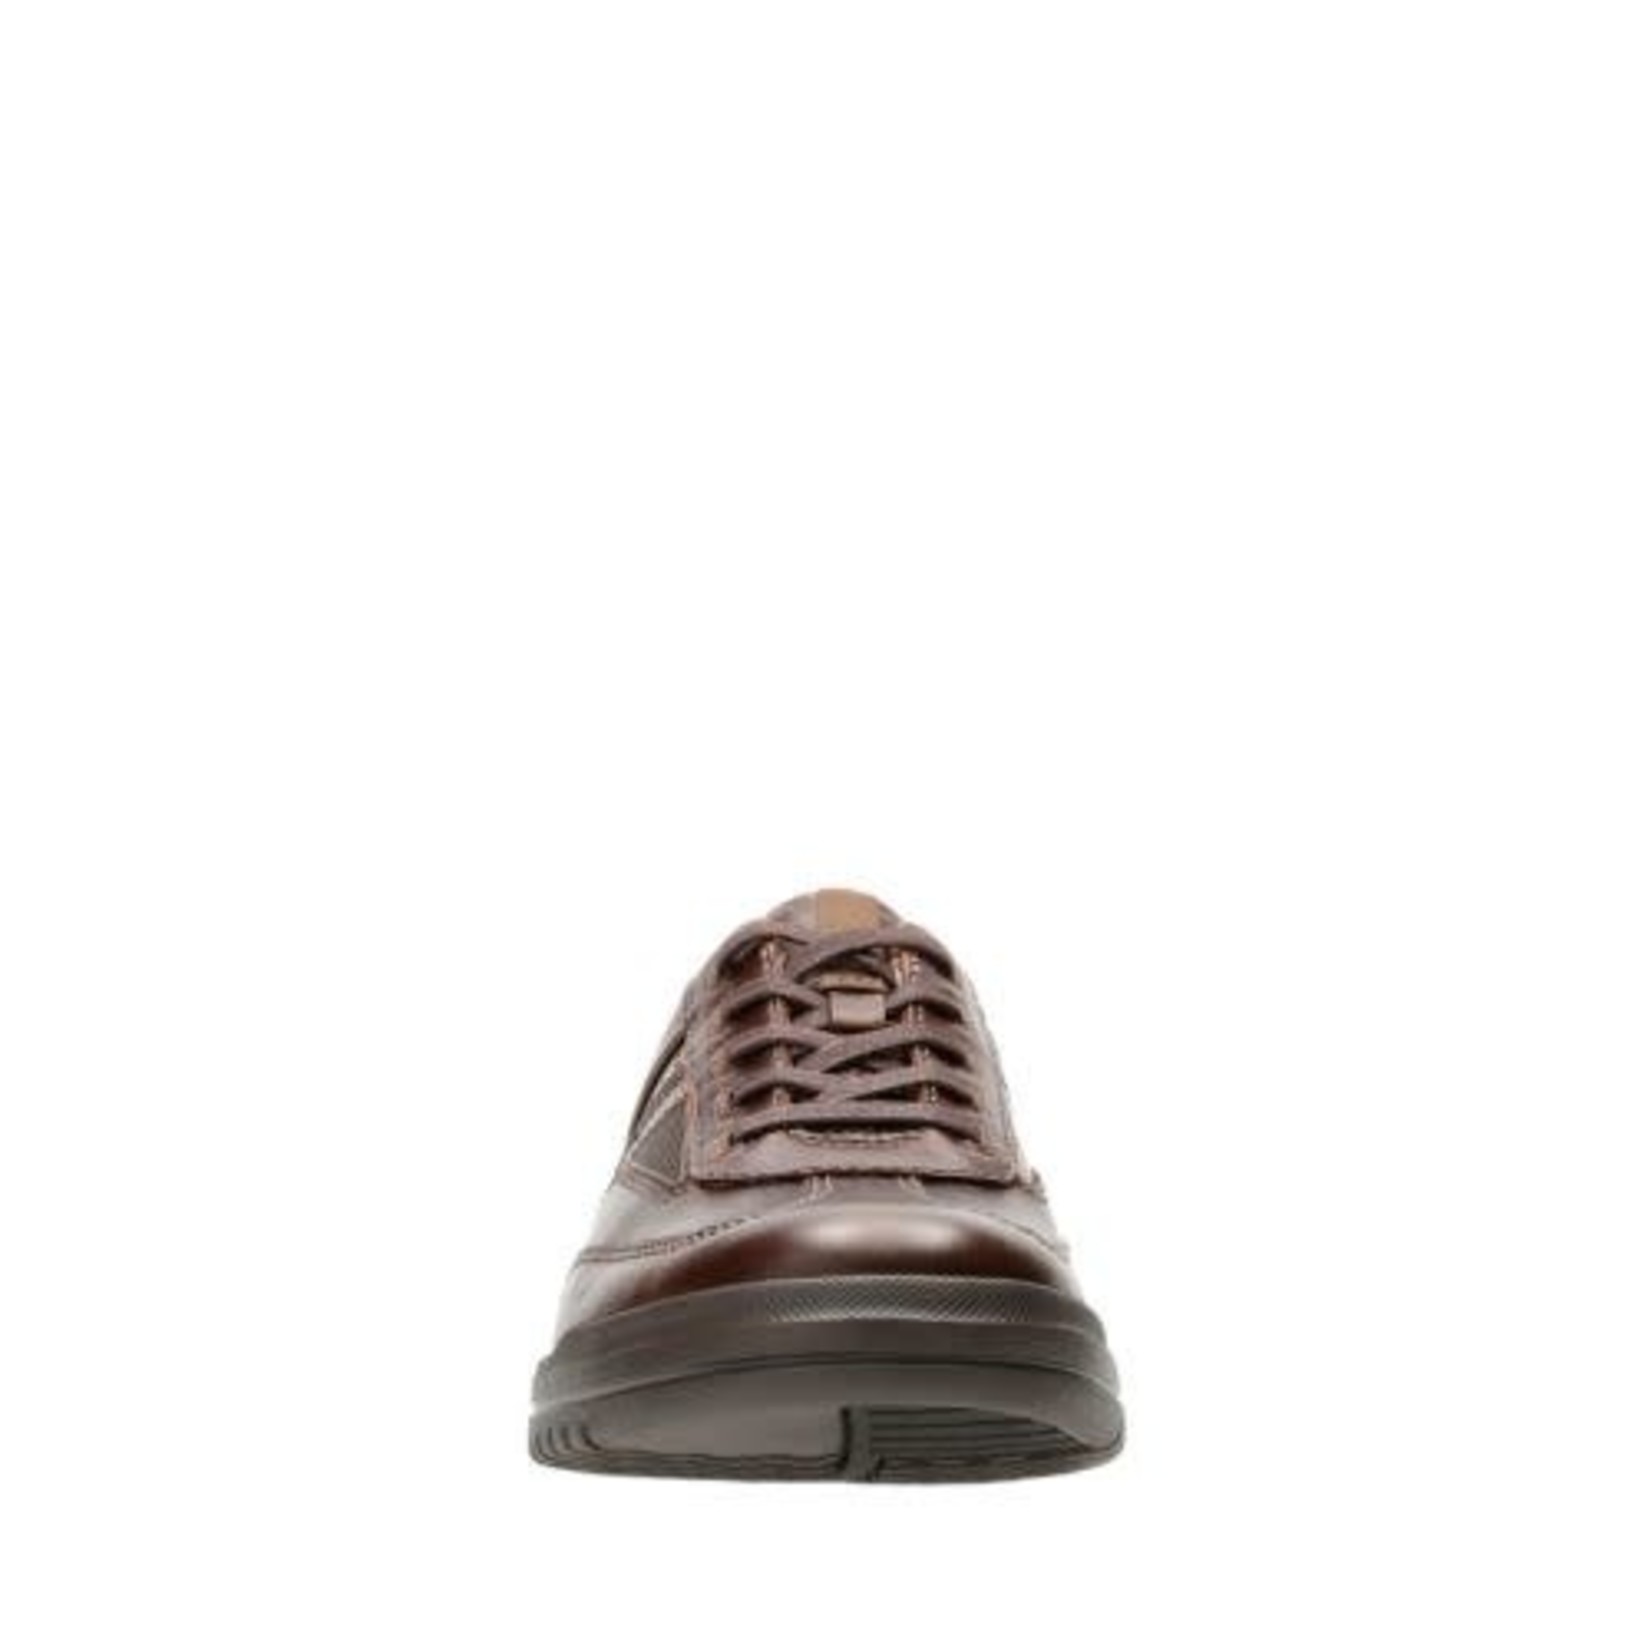 CLARKS CLARKS- UNRHOMBUS FLY- BROWN LEATHER